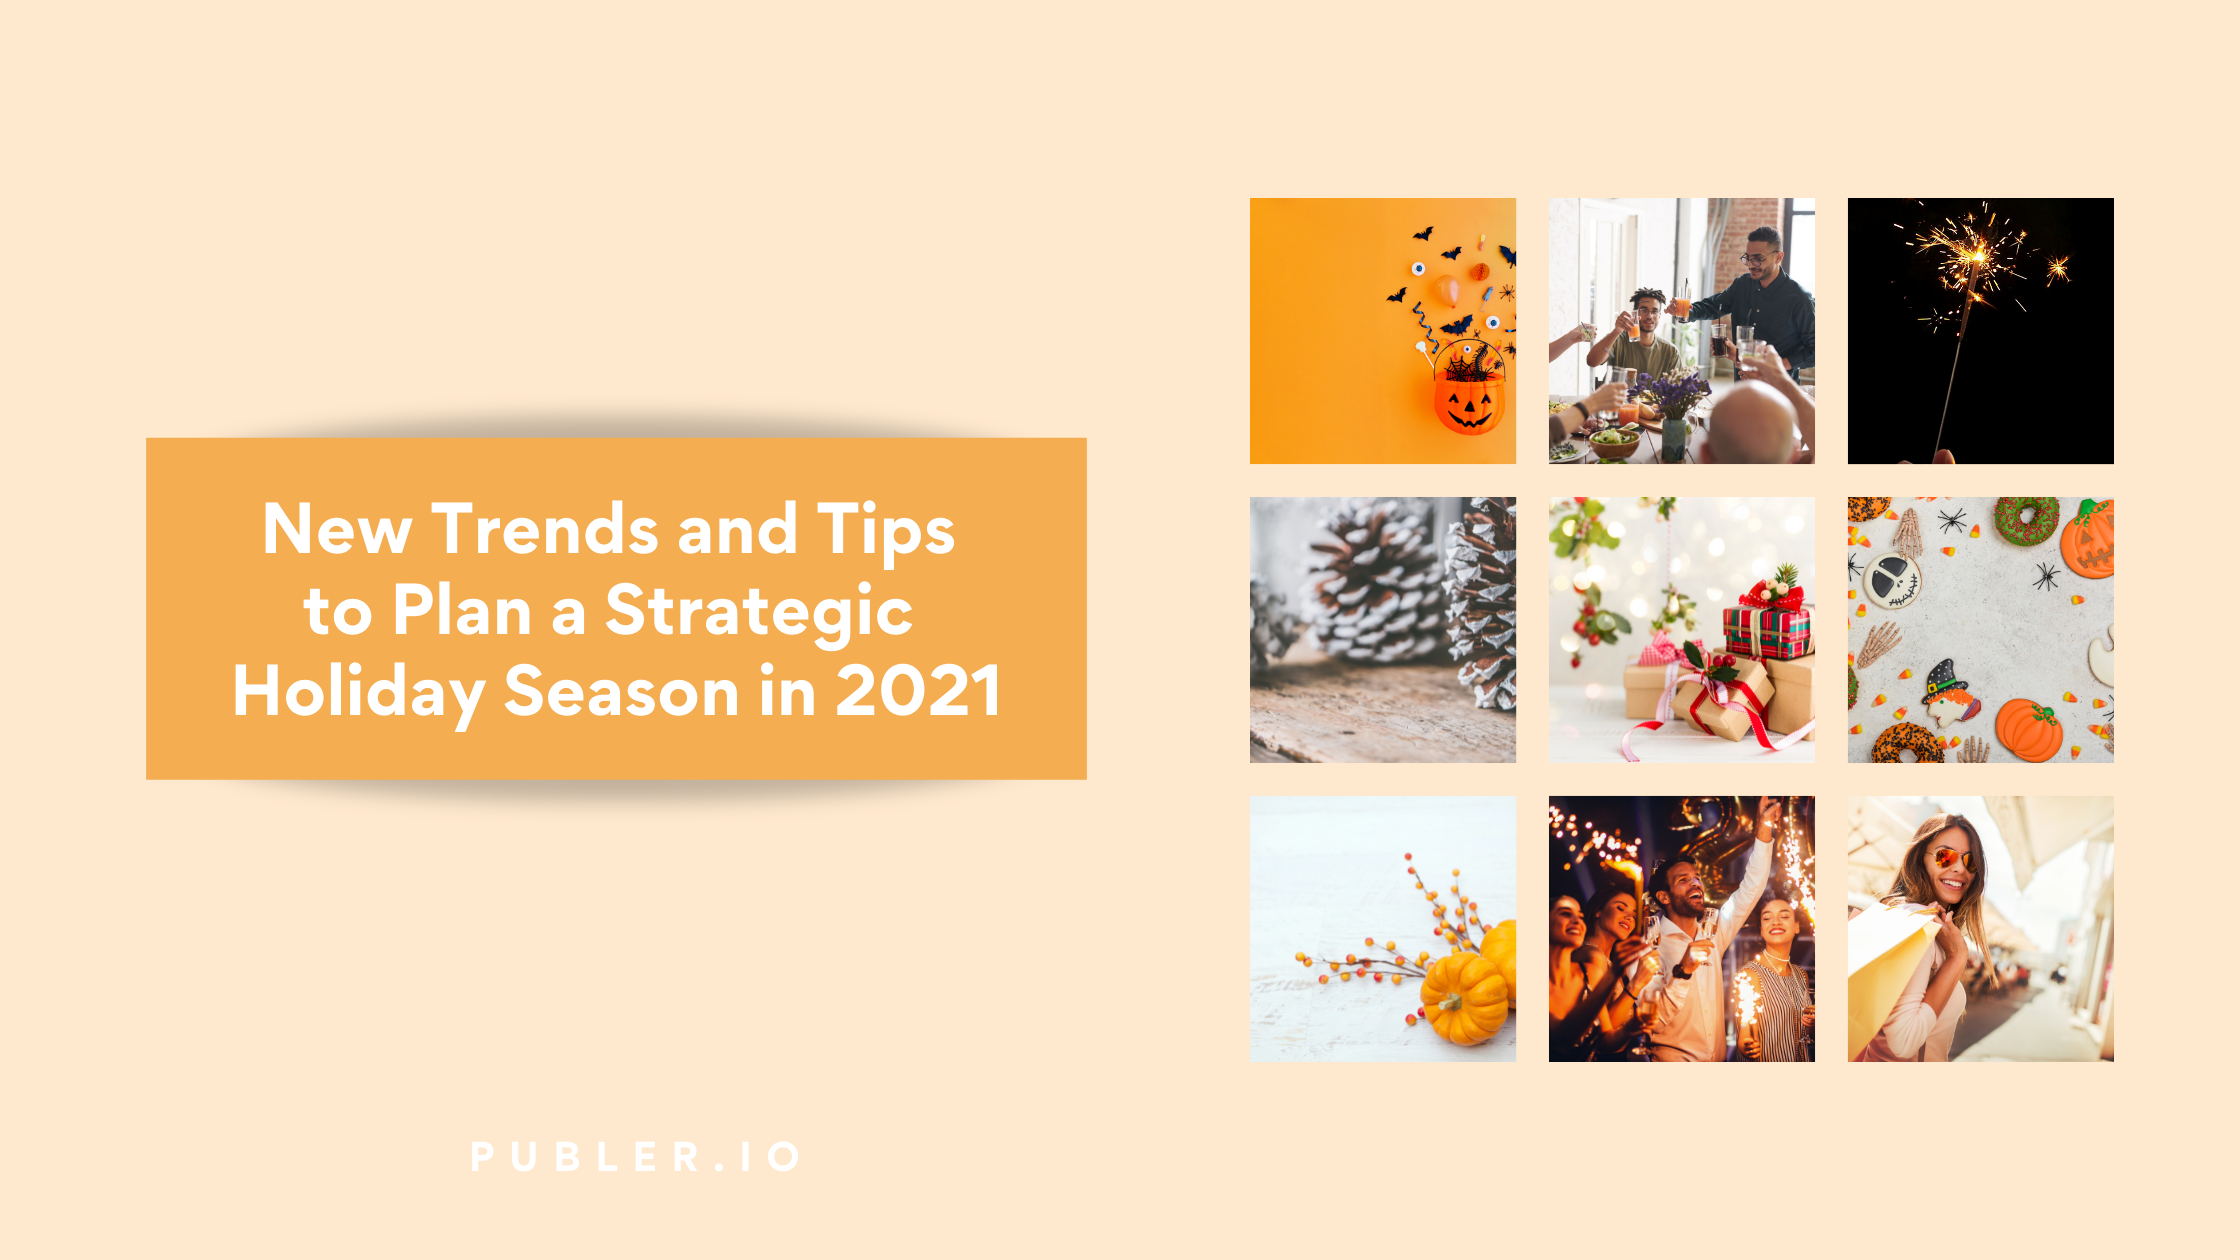 Download the full festive holiday guides from major social networks in a click. Become part of trends and earn an online reputation easily.

New Trends and Tips to Plan a Strategic Holiday Season in 2021 by Publer.io